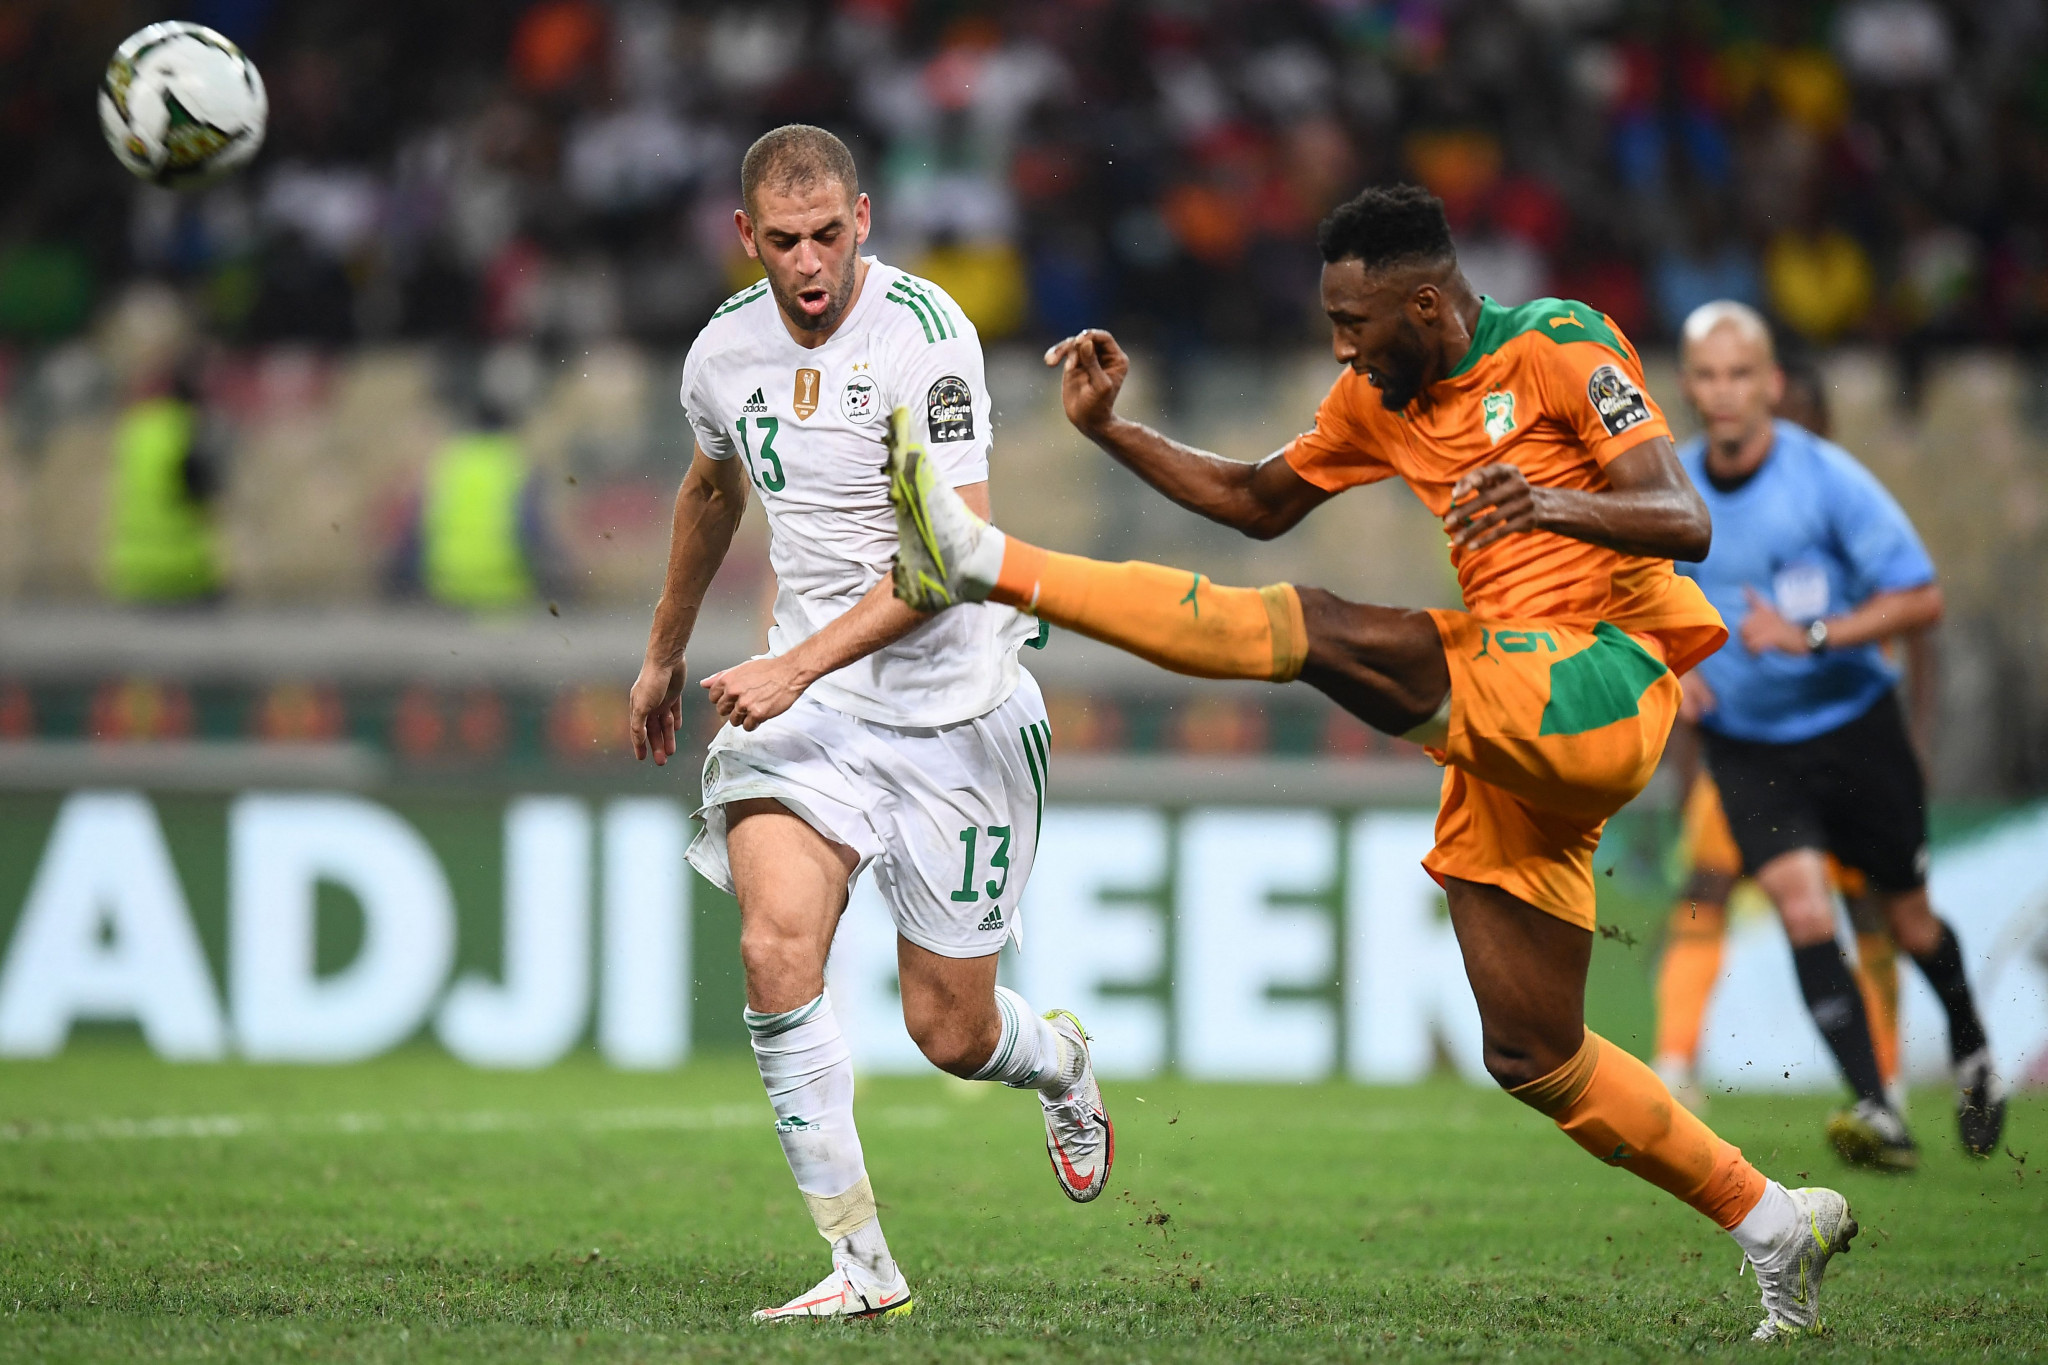 Holders Algeria, playing in white, were eliminated at the group stage of the Africa Cup of Nations, after being beaten by Ivory Coast ©Getty Images